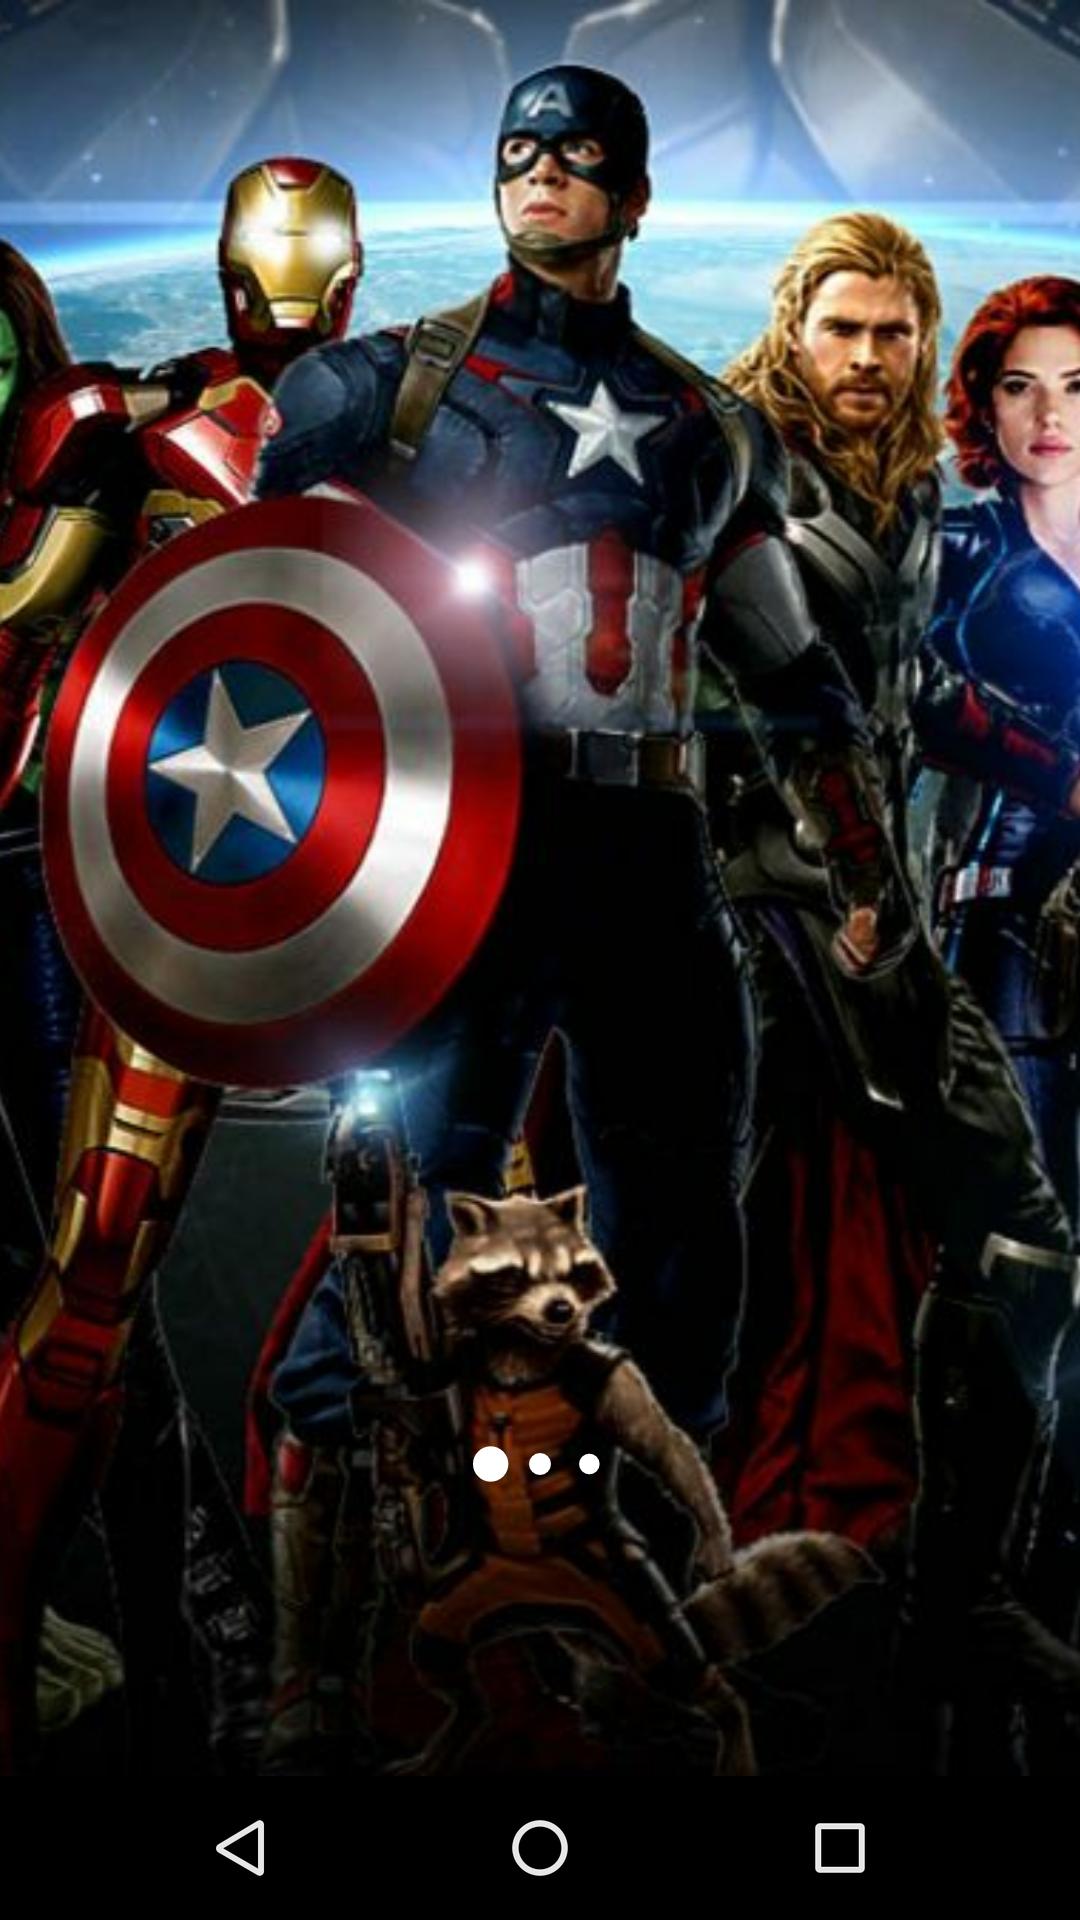  Avengers  Wallpaper  HD  for Android  APK Download